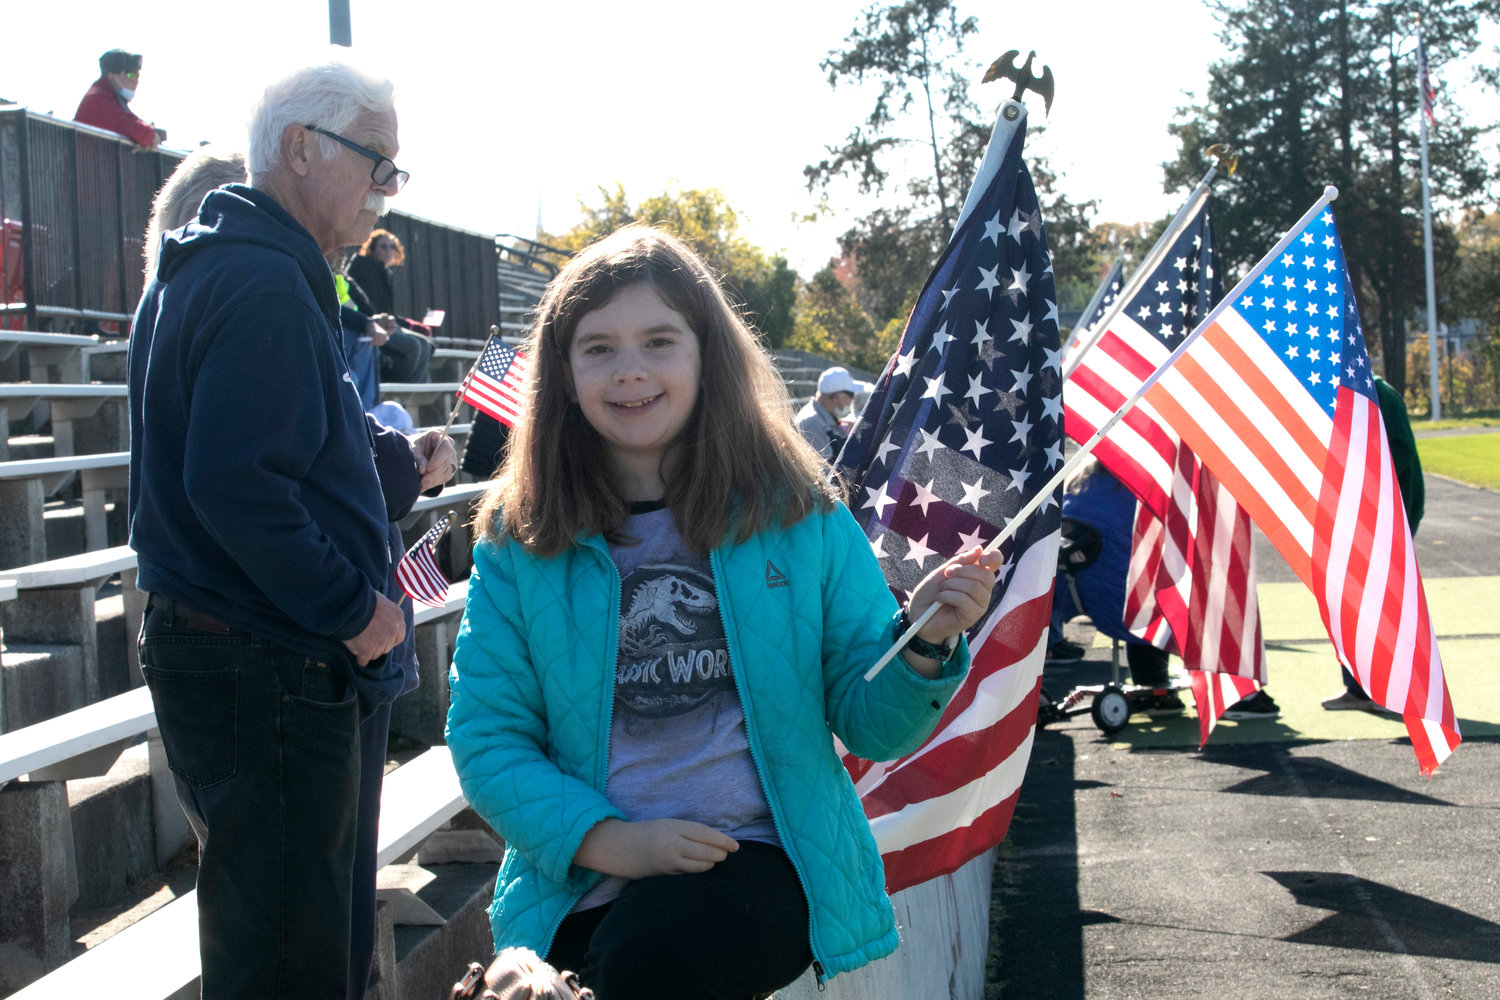 Madeleine Bentley, great grand daughter of Manuel J. Amaral, the eldest of the five Amaral Brothers who all served together in the US Navy during WWII, waves a flag during the ceremony. The Amaral Brothers Bridge on Veterans Memorial Parkway is named in their honor.